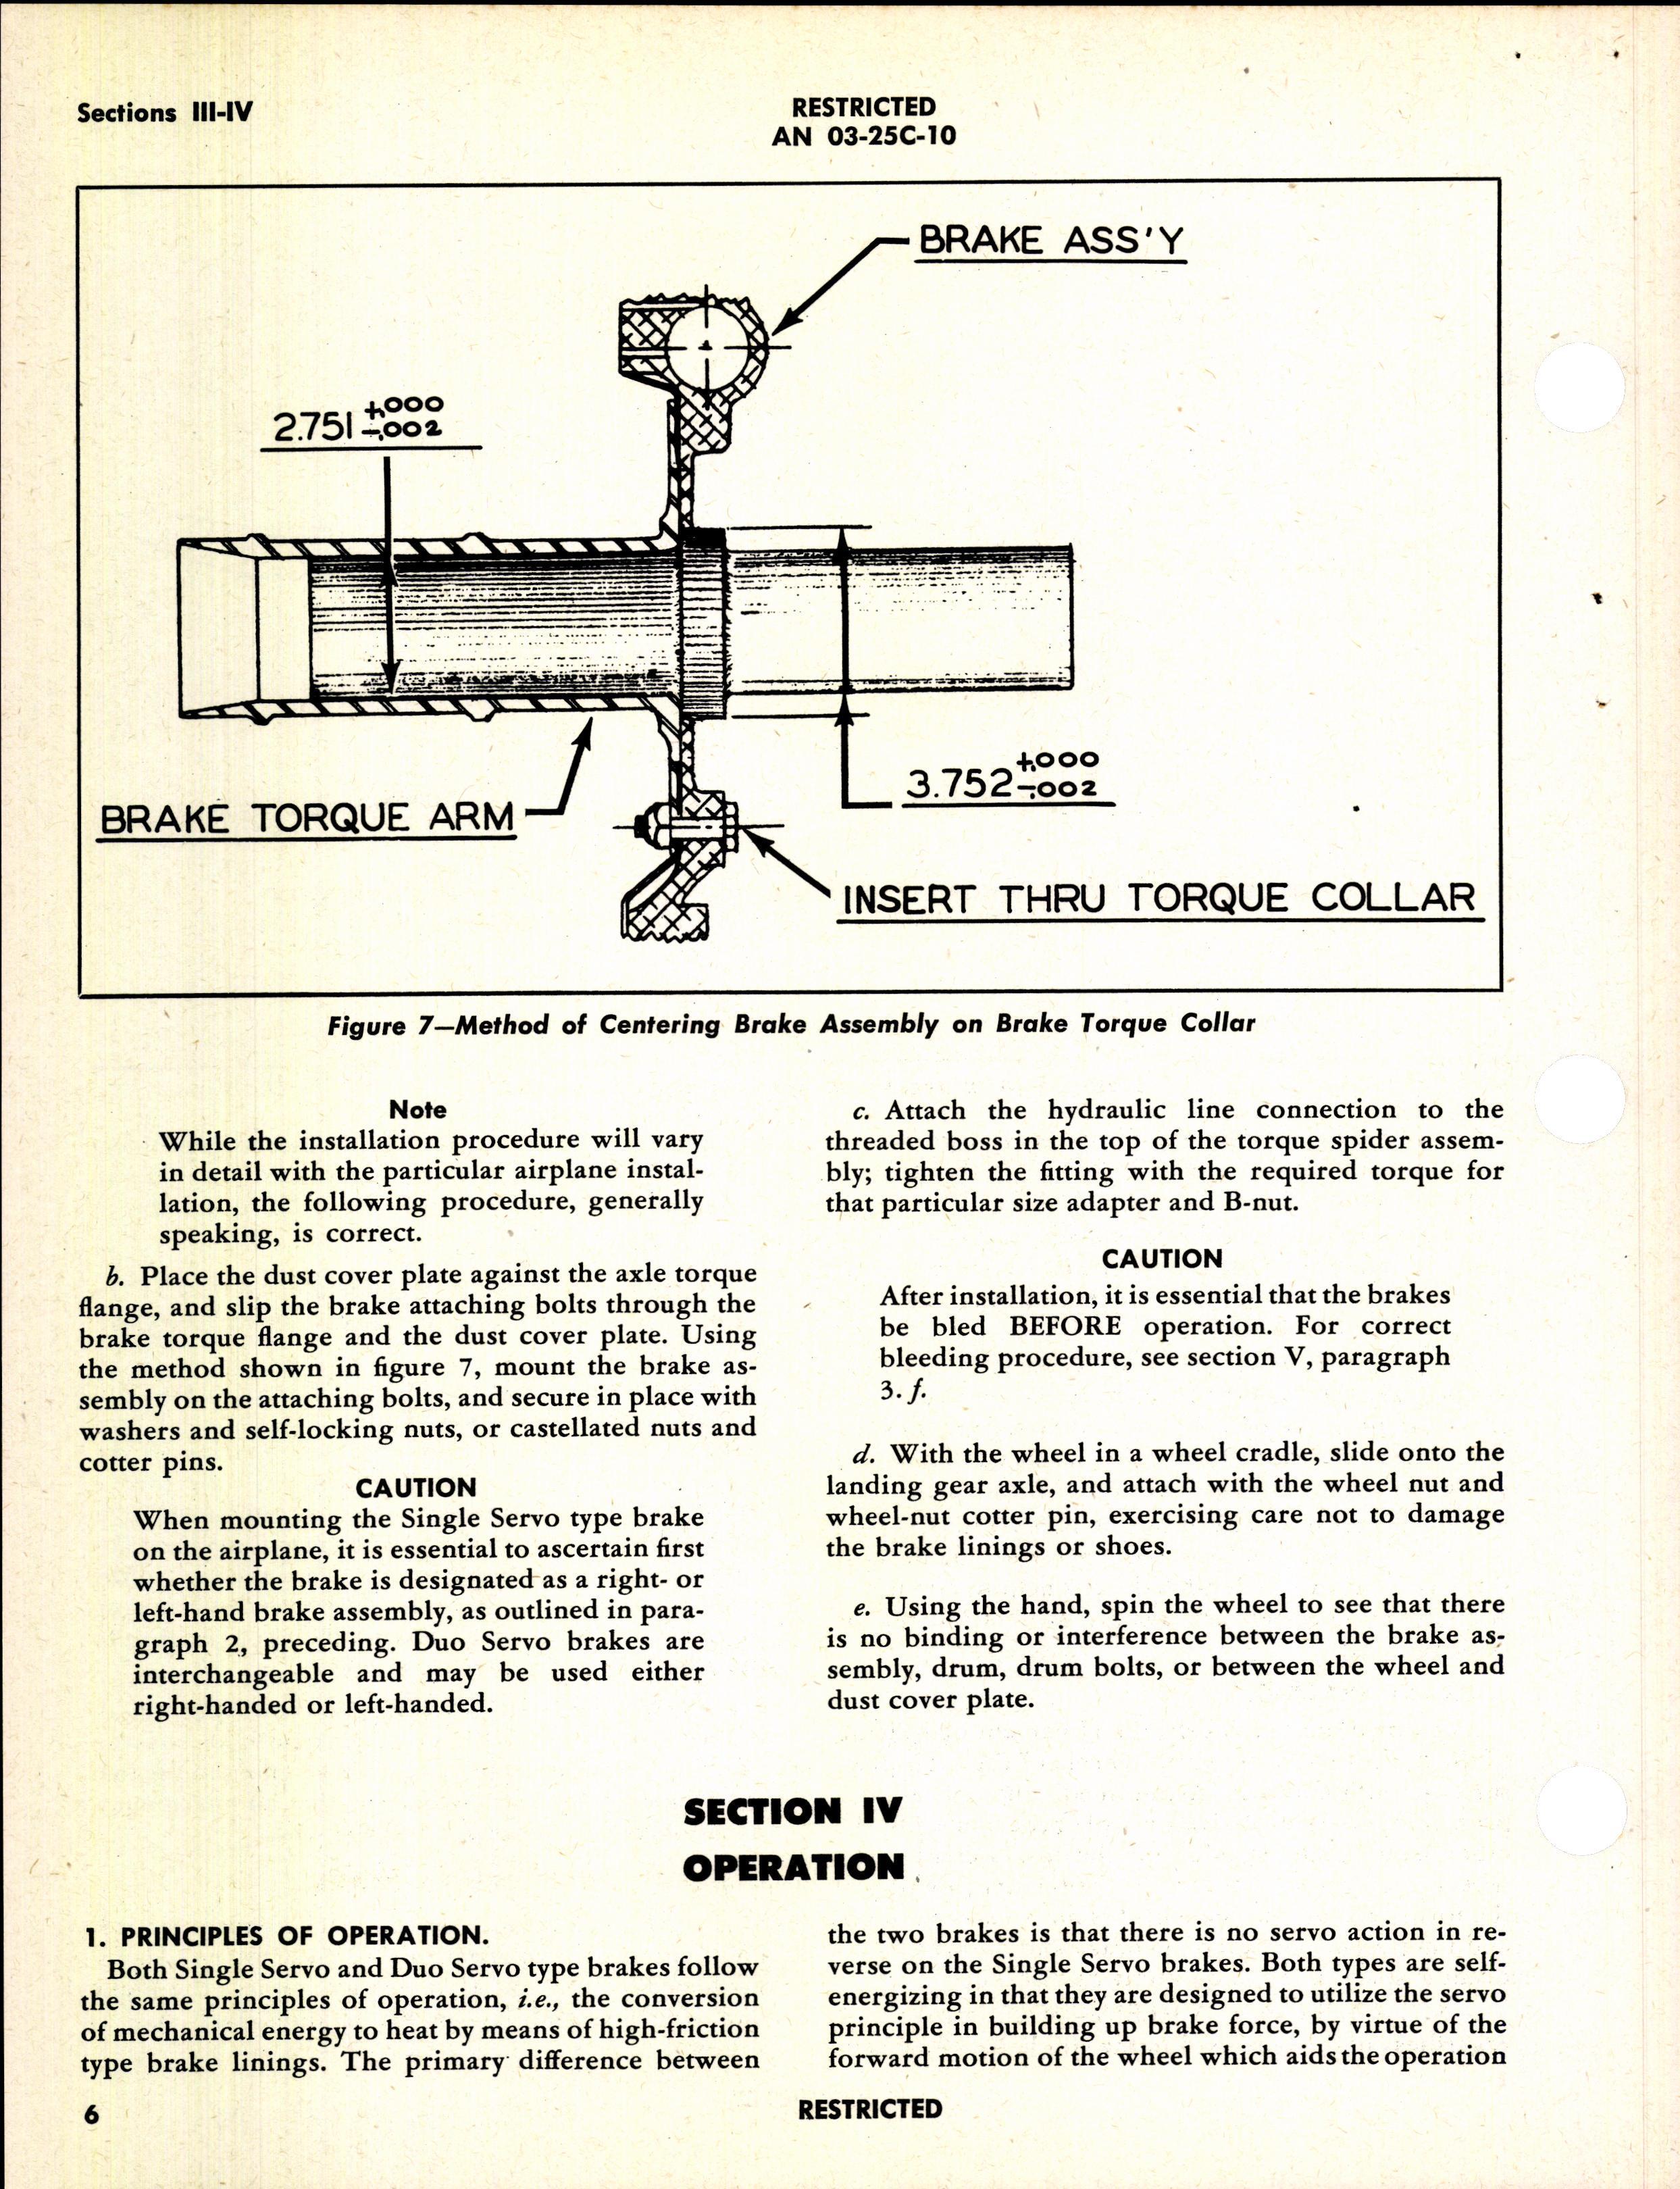 Sample page  30 from AirCorps Library document: Handbook of Instructions with Parts Catalog for Bendix Brakes (Later Types)